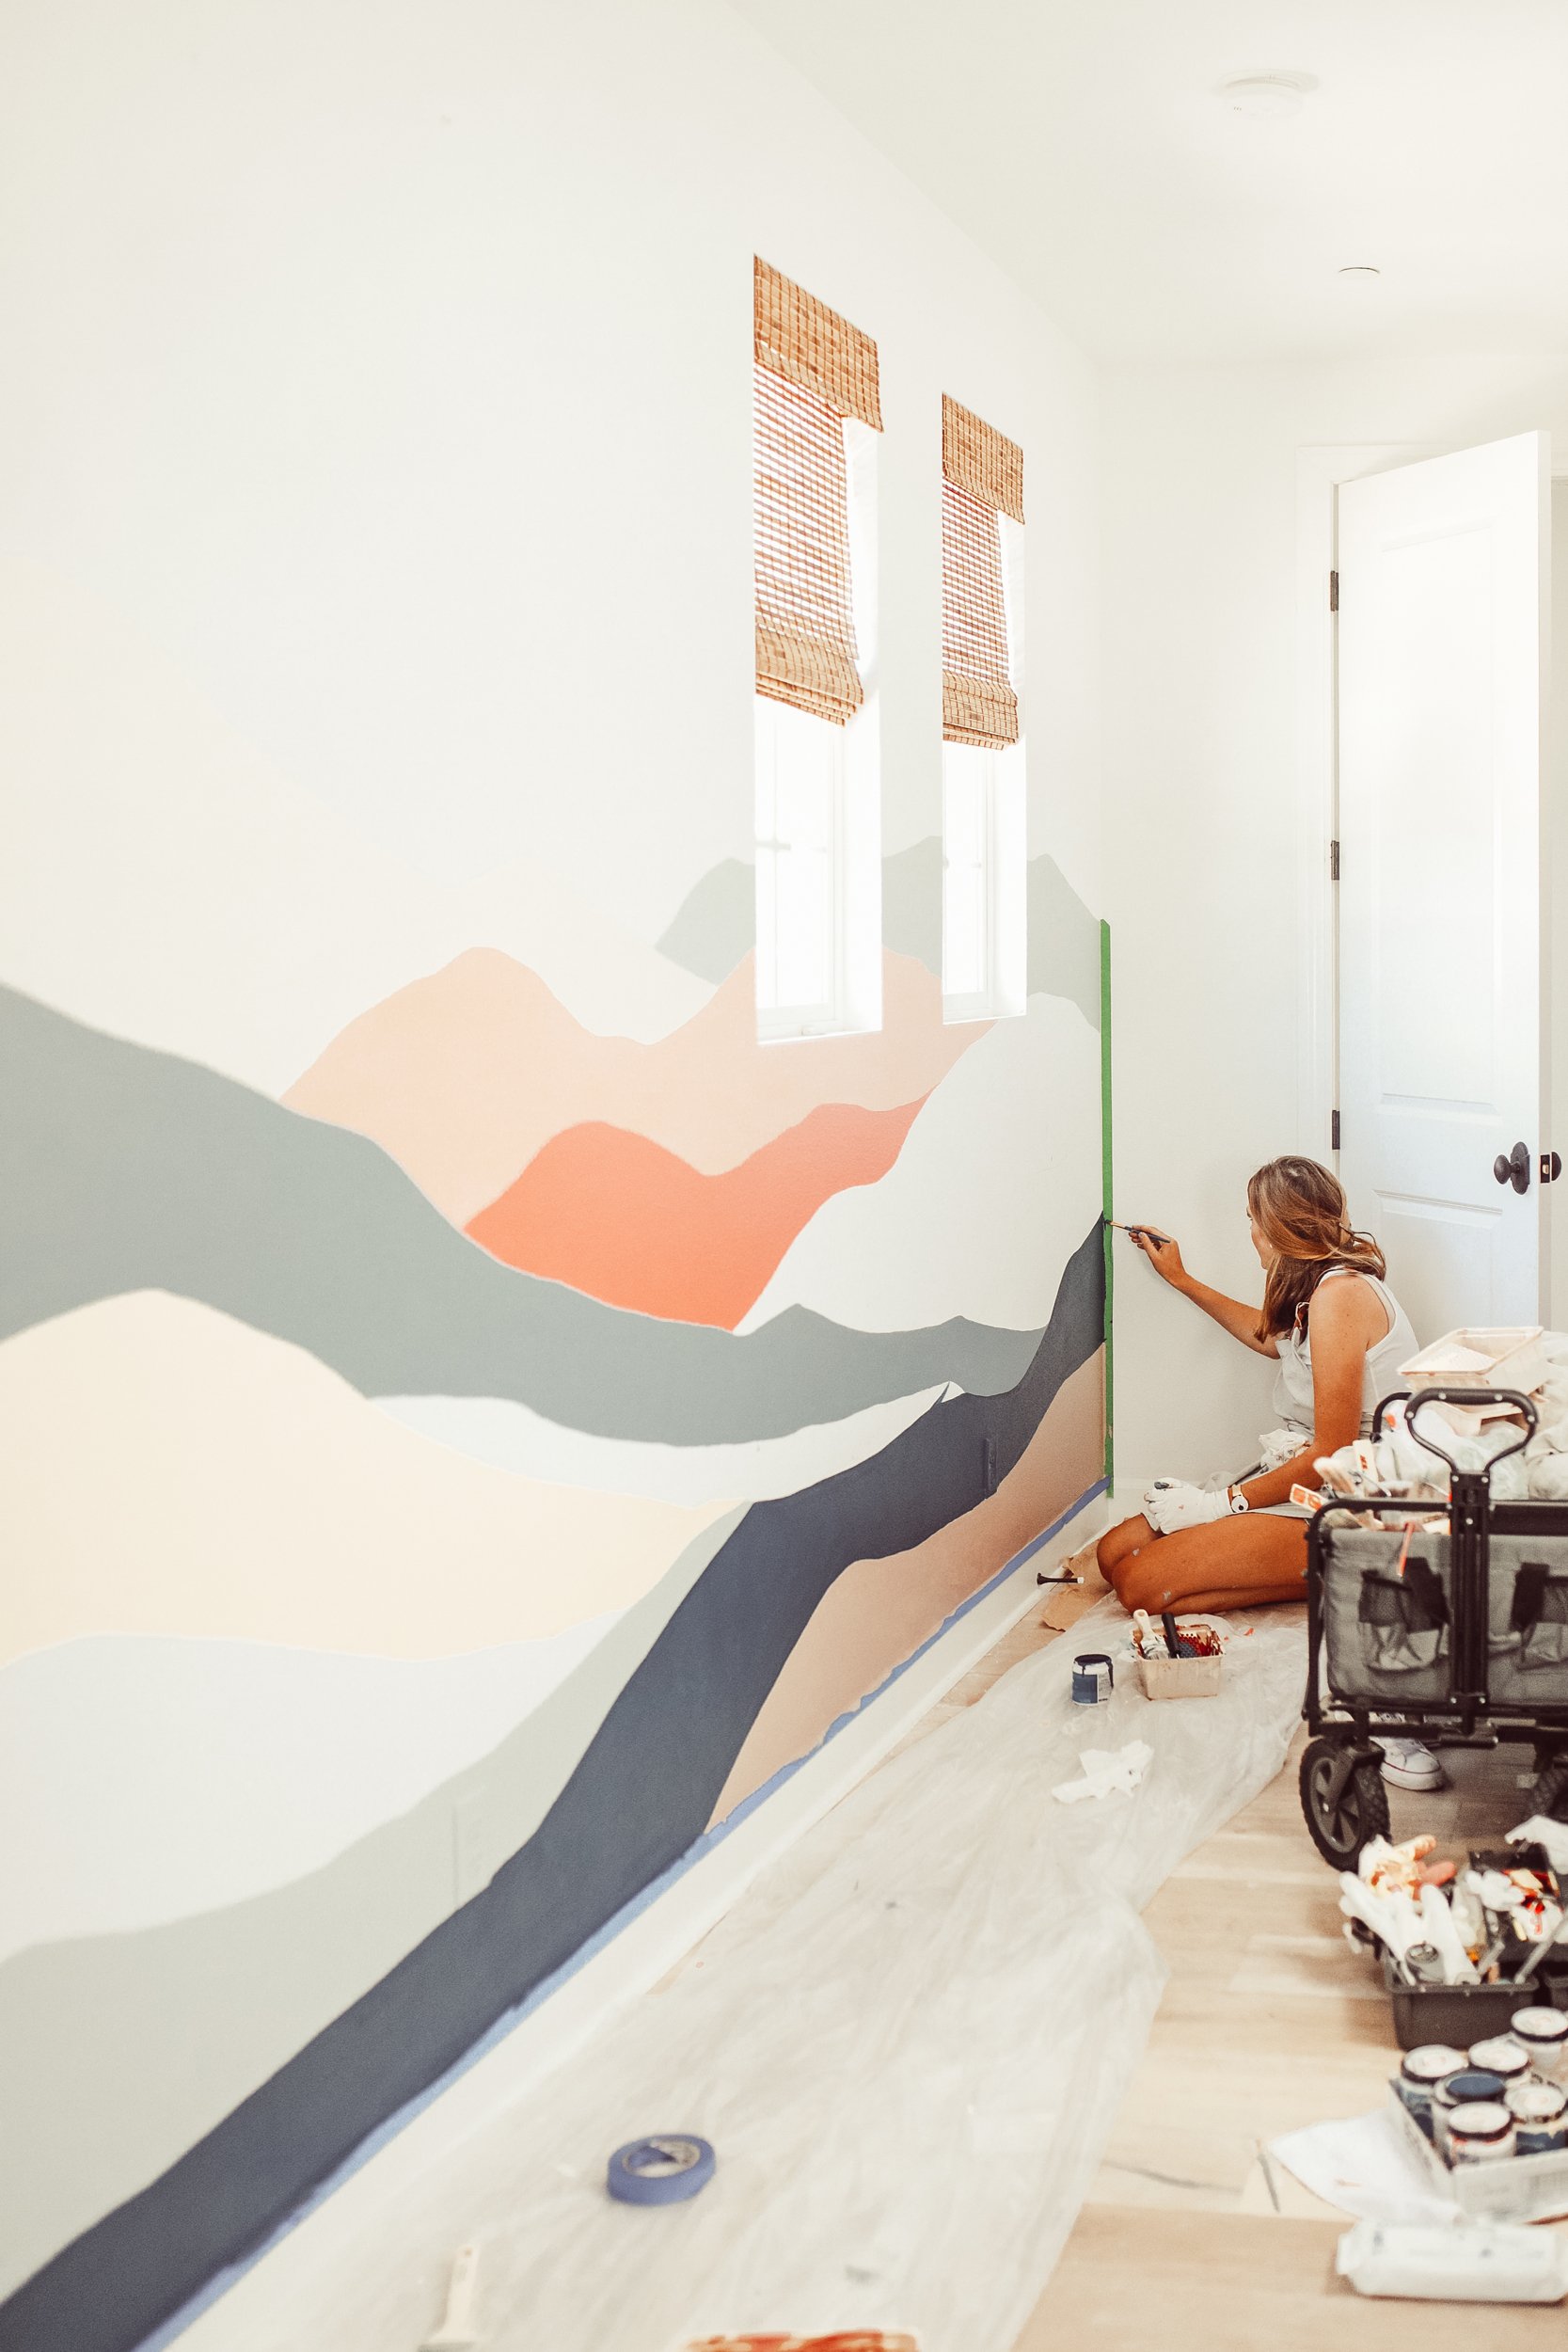 painting wall mural